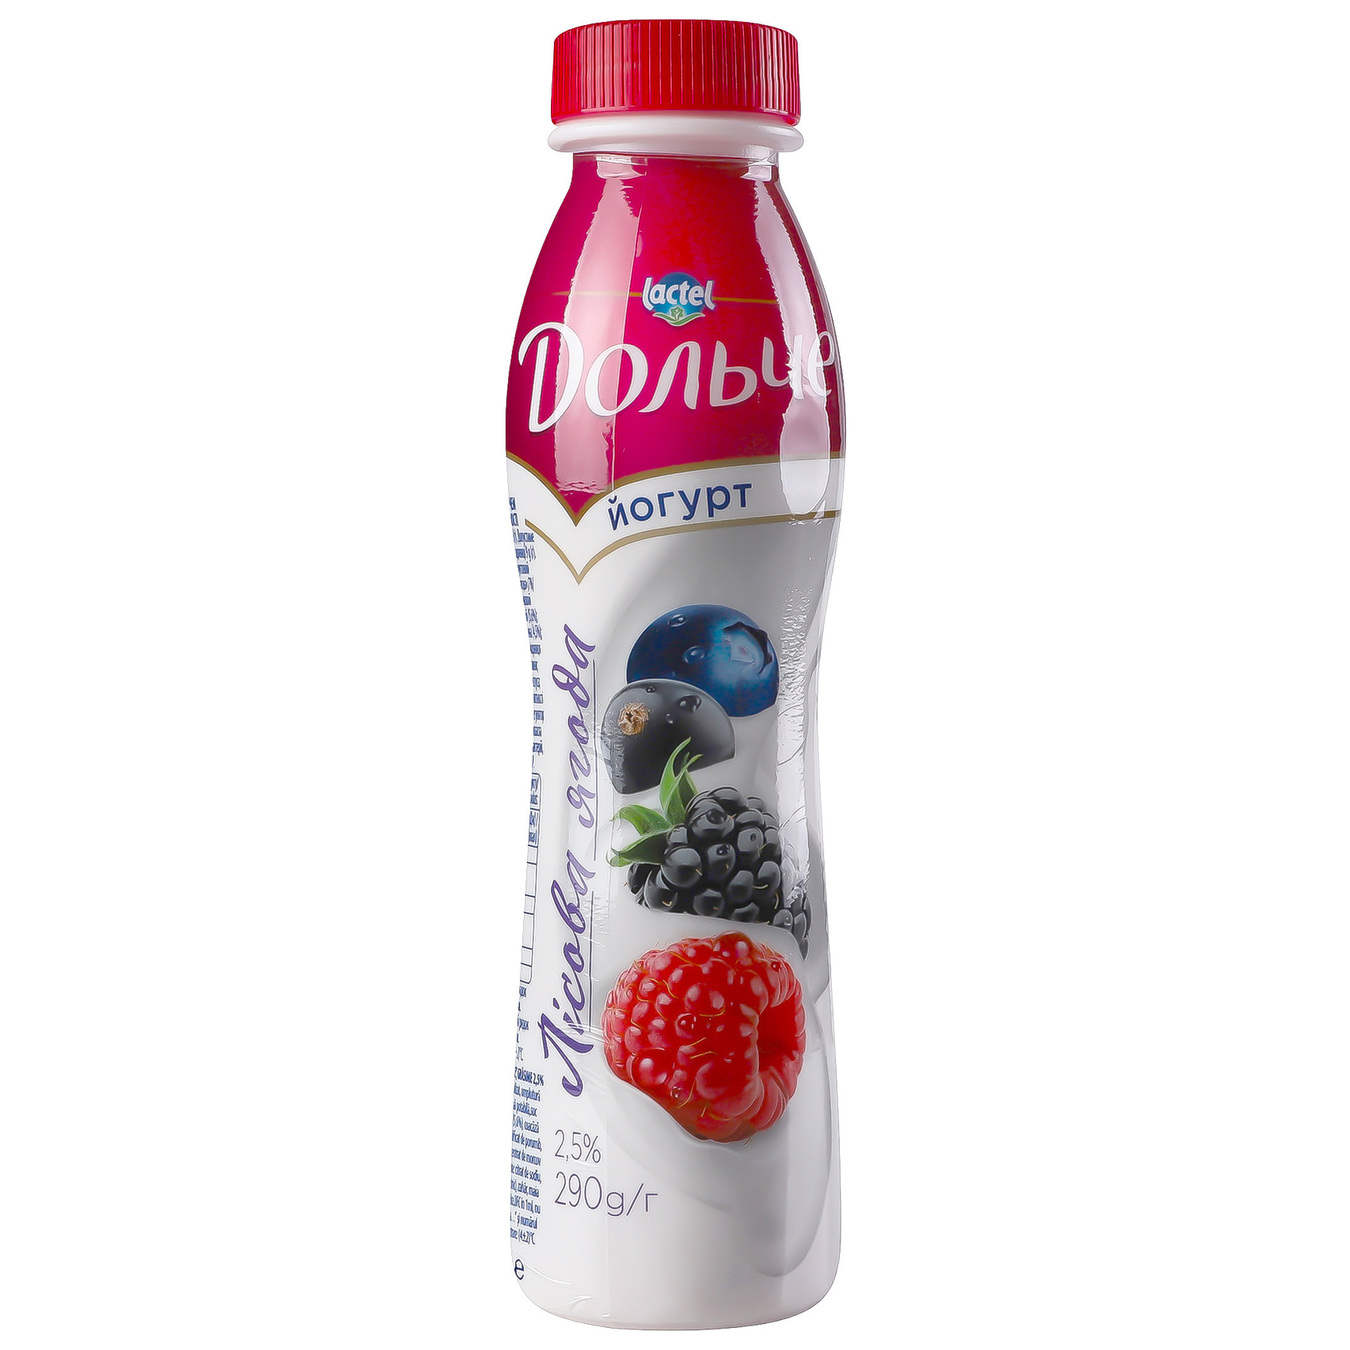 Yoghurt Dolce with reminiscent forest berries 2.5% 290g